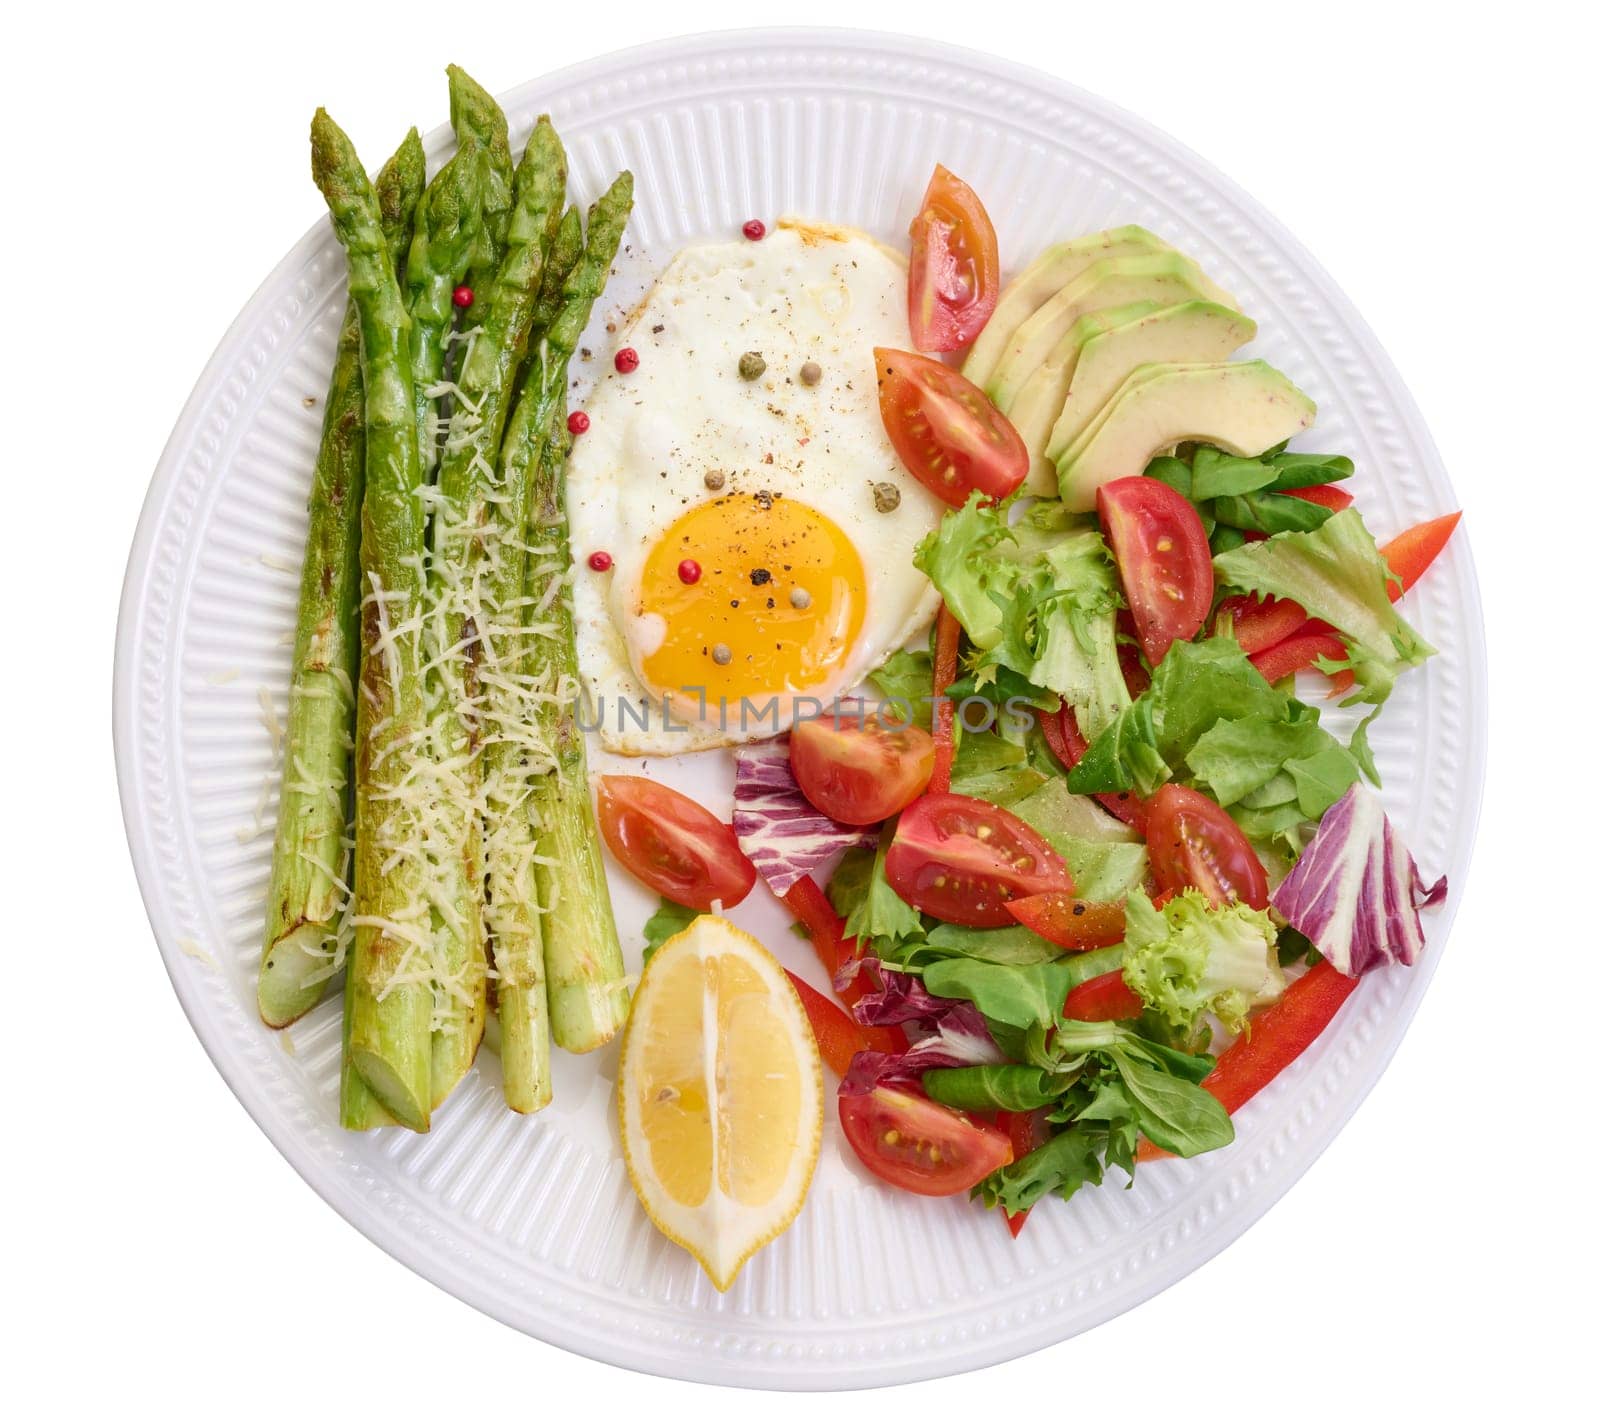 Round plate with cooked asparagus, fried egg, avocado and fresh vegetable salad by ndanko